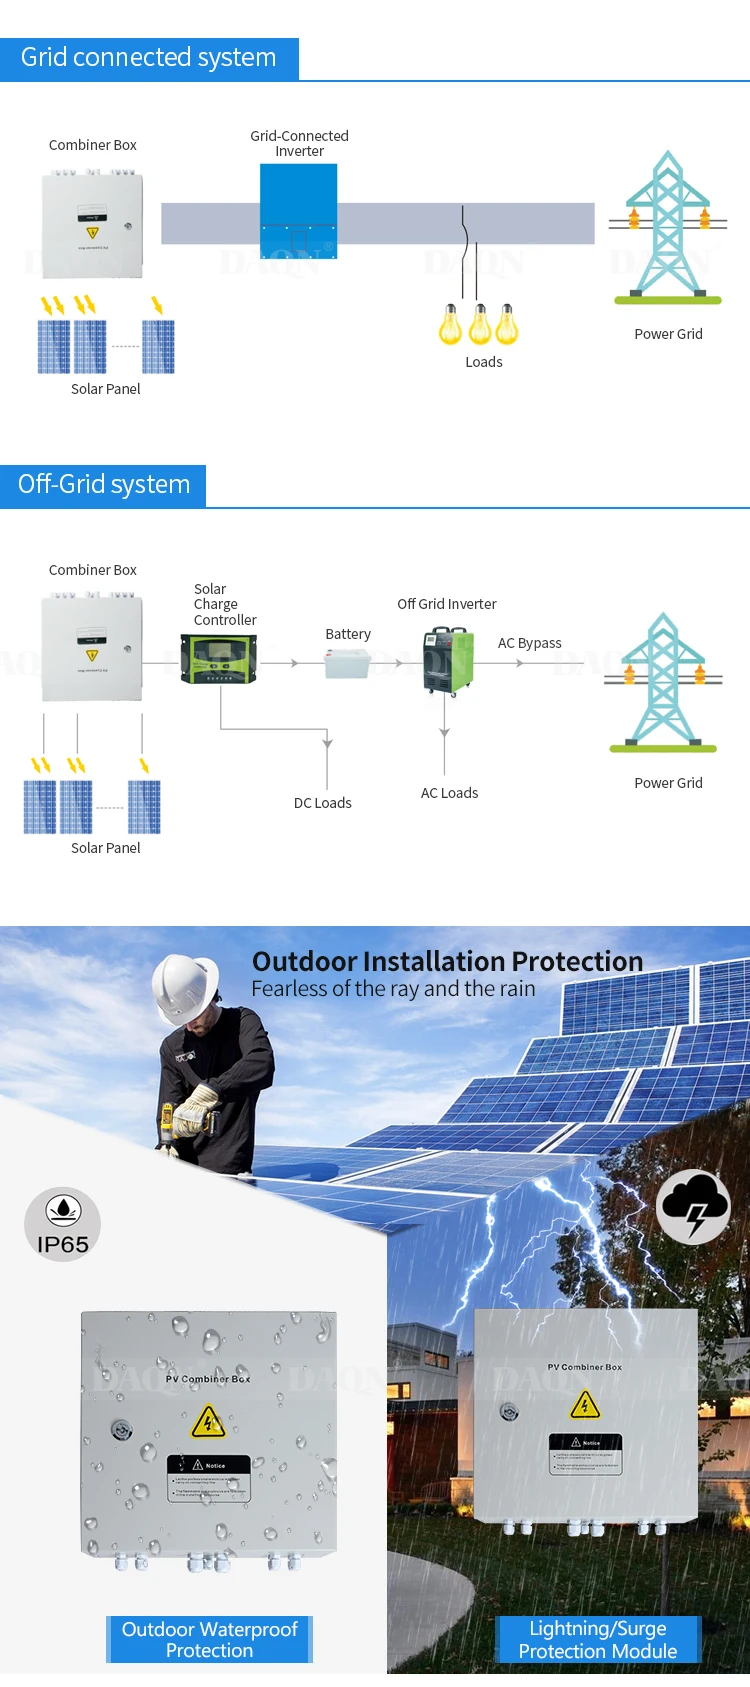 ALLTOP High Frequency PV off grid DC AC Hybrid solar pv array combiner box for solar power system home